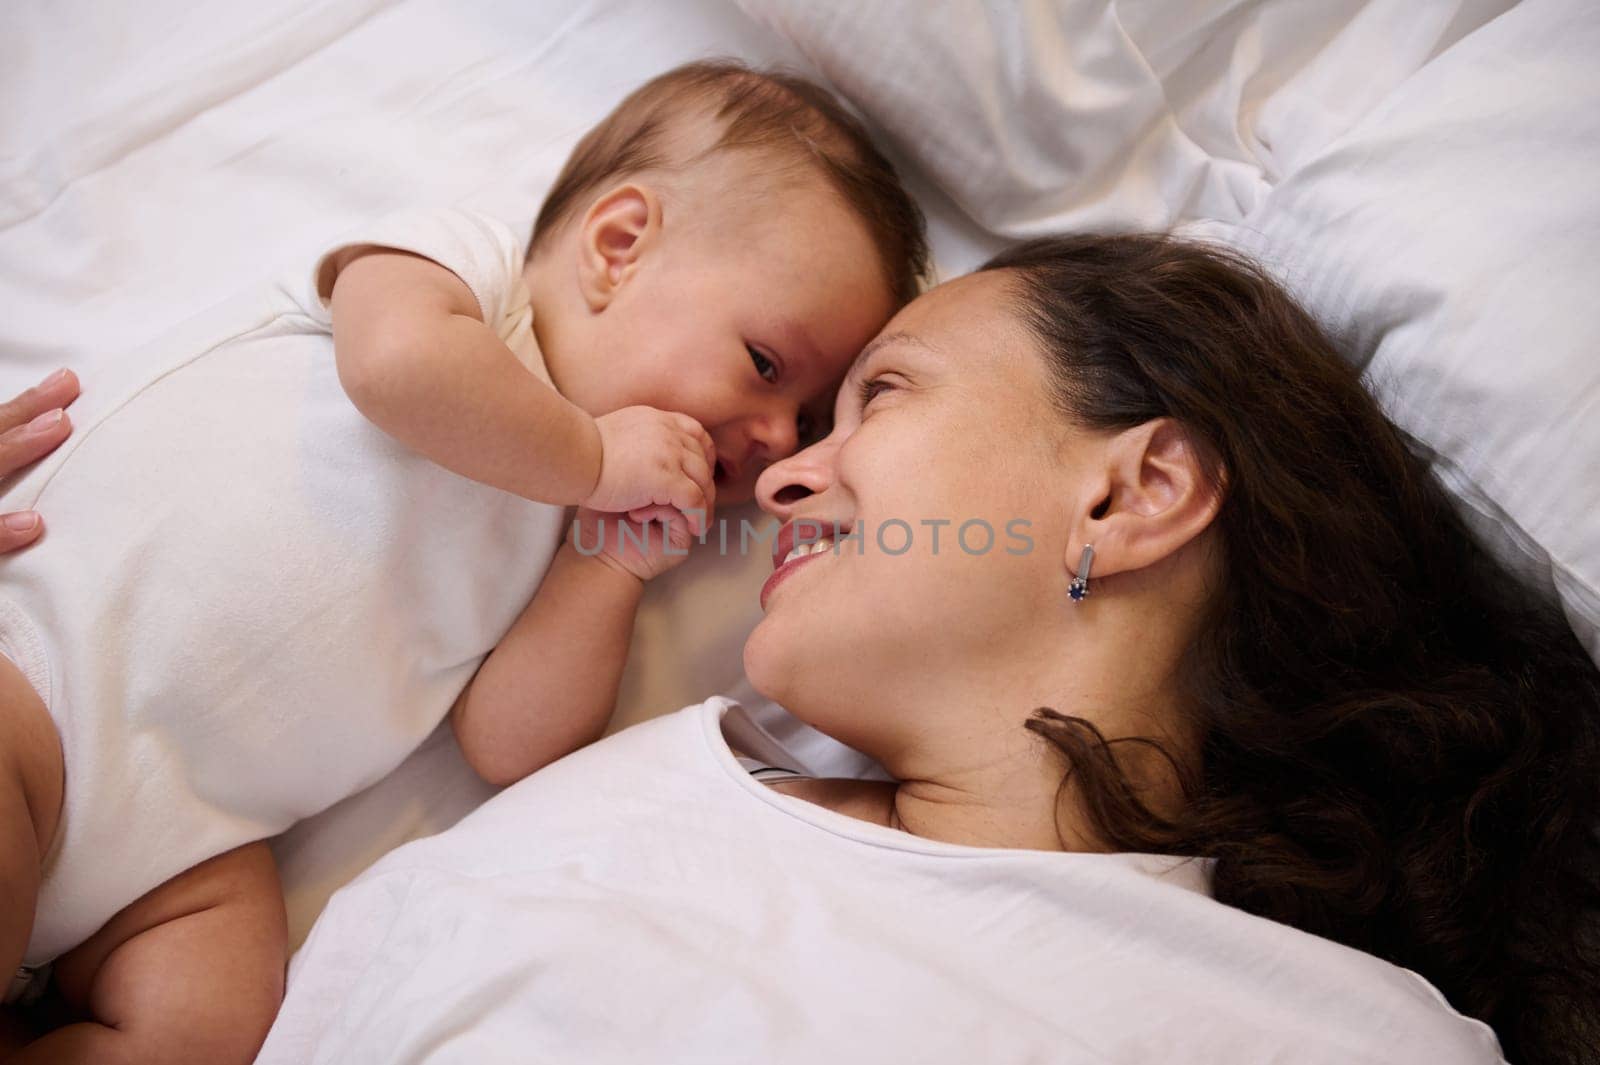 Close-up portrait of a happy smiling mother with her cute little baby lying on the bed, feeling emotional contact. Family relationships. Babyhood. Child and baby care. Maternity leave and motherhood